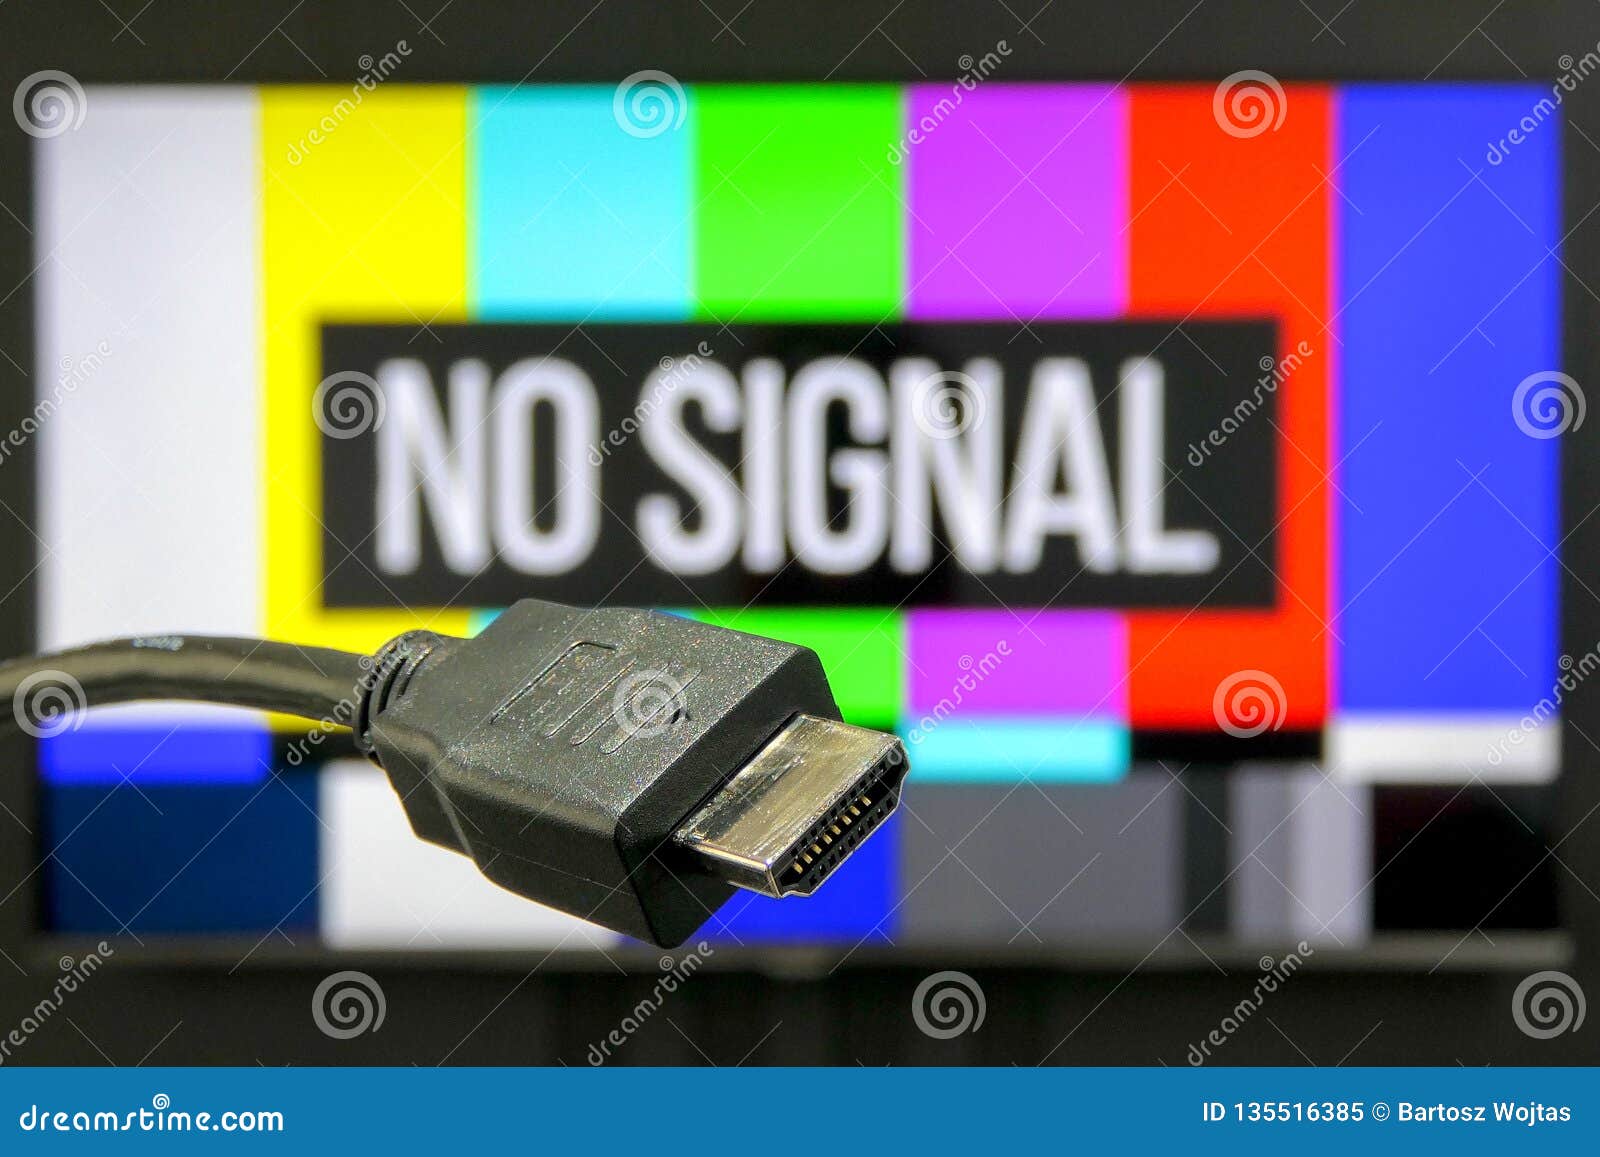 hdmi cable no signal on tv from laptop